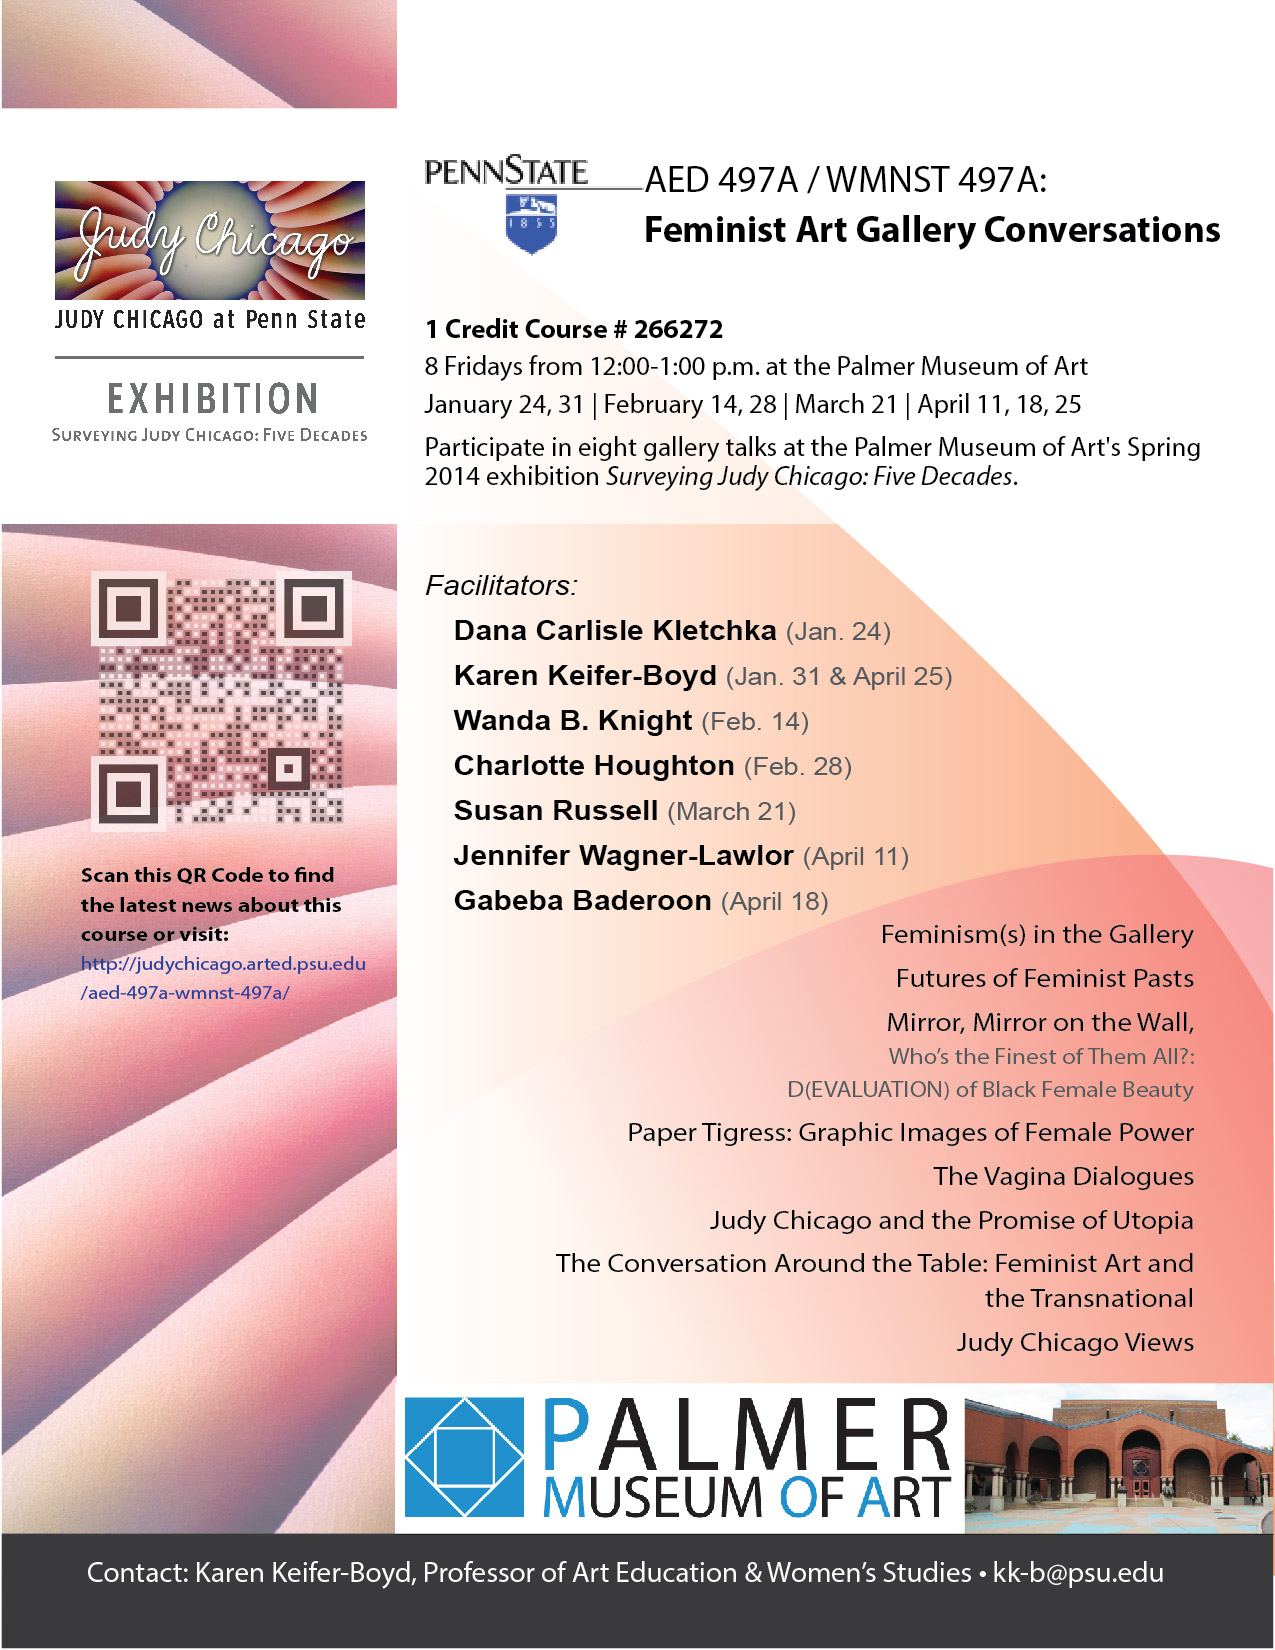 AED 497A/ WMNST 497A: Feminist Art Gallery Conversations Flyer